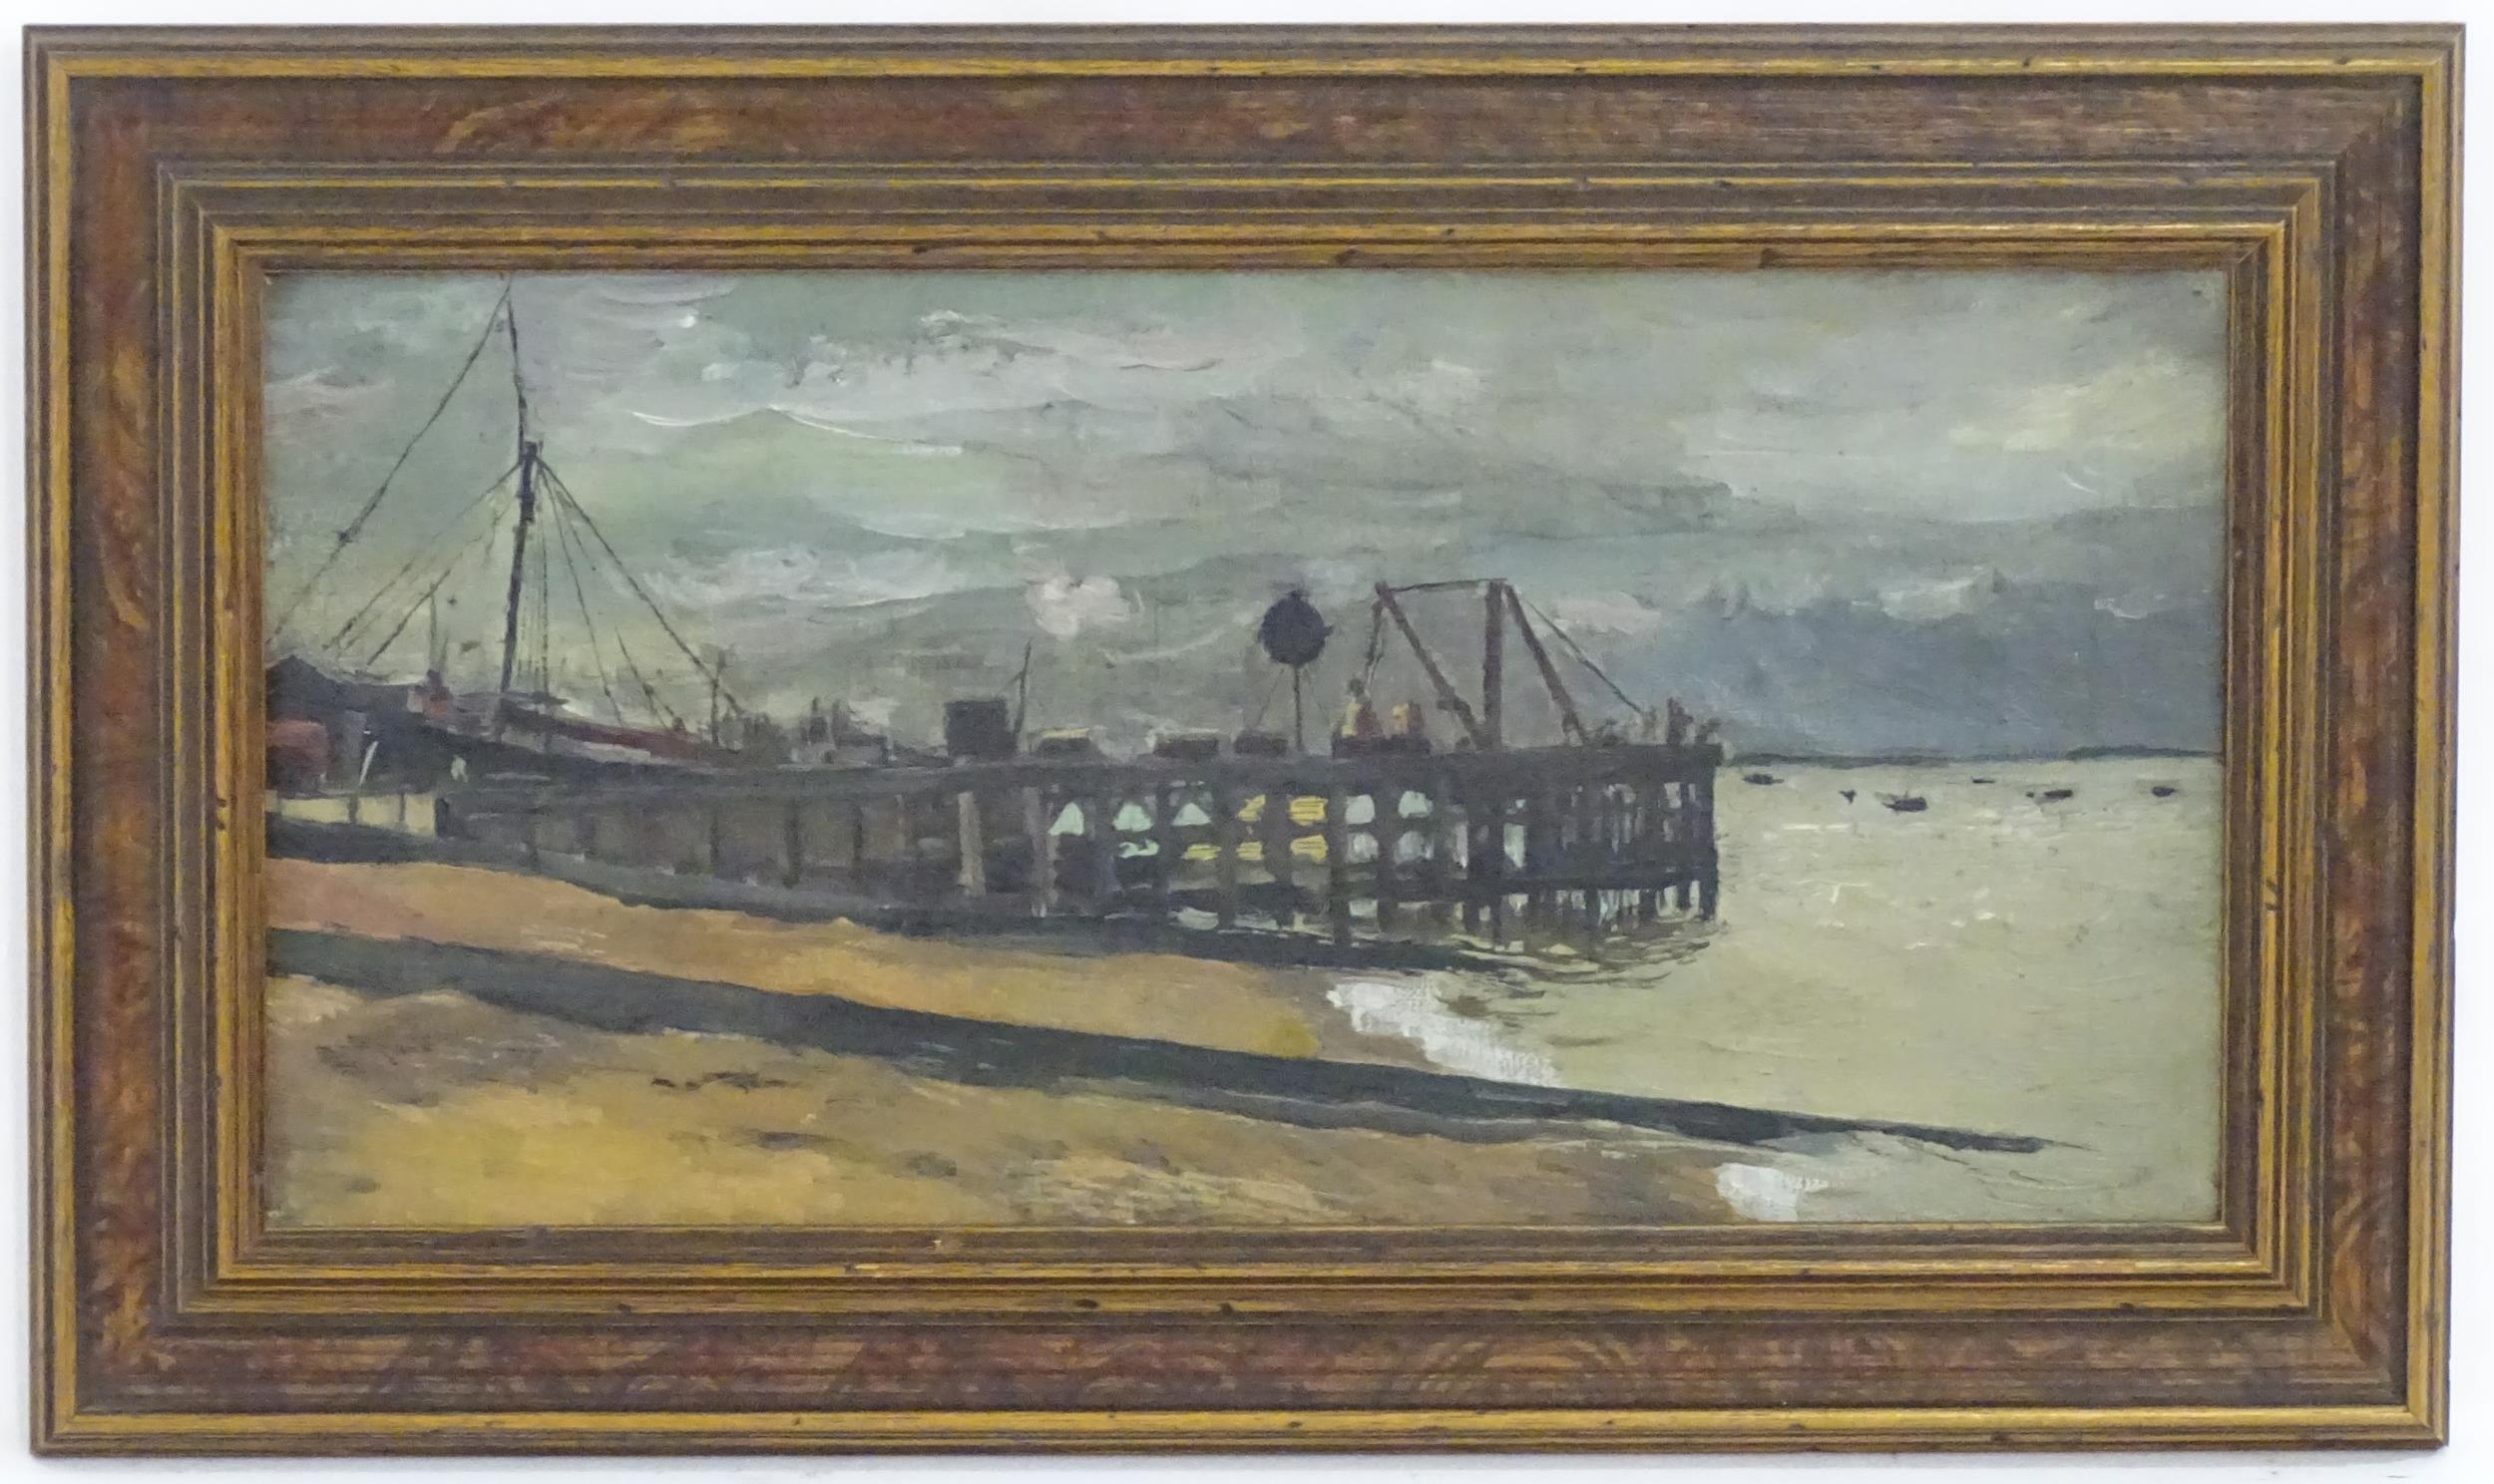 Late 19th / early 20th century, English School, Oil on canvas, A view of the staithe / pier at Deal, - Image 3 of 5